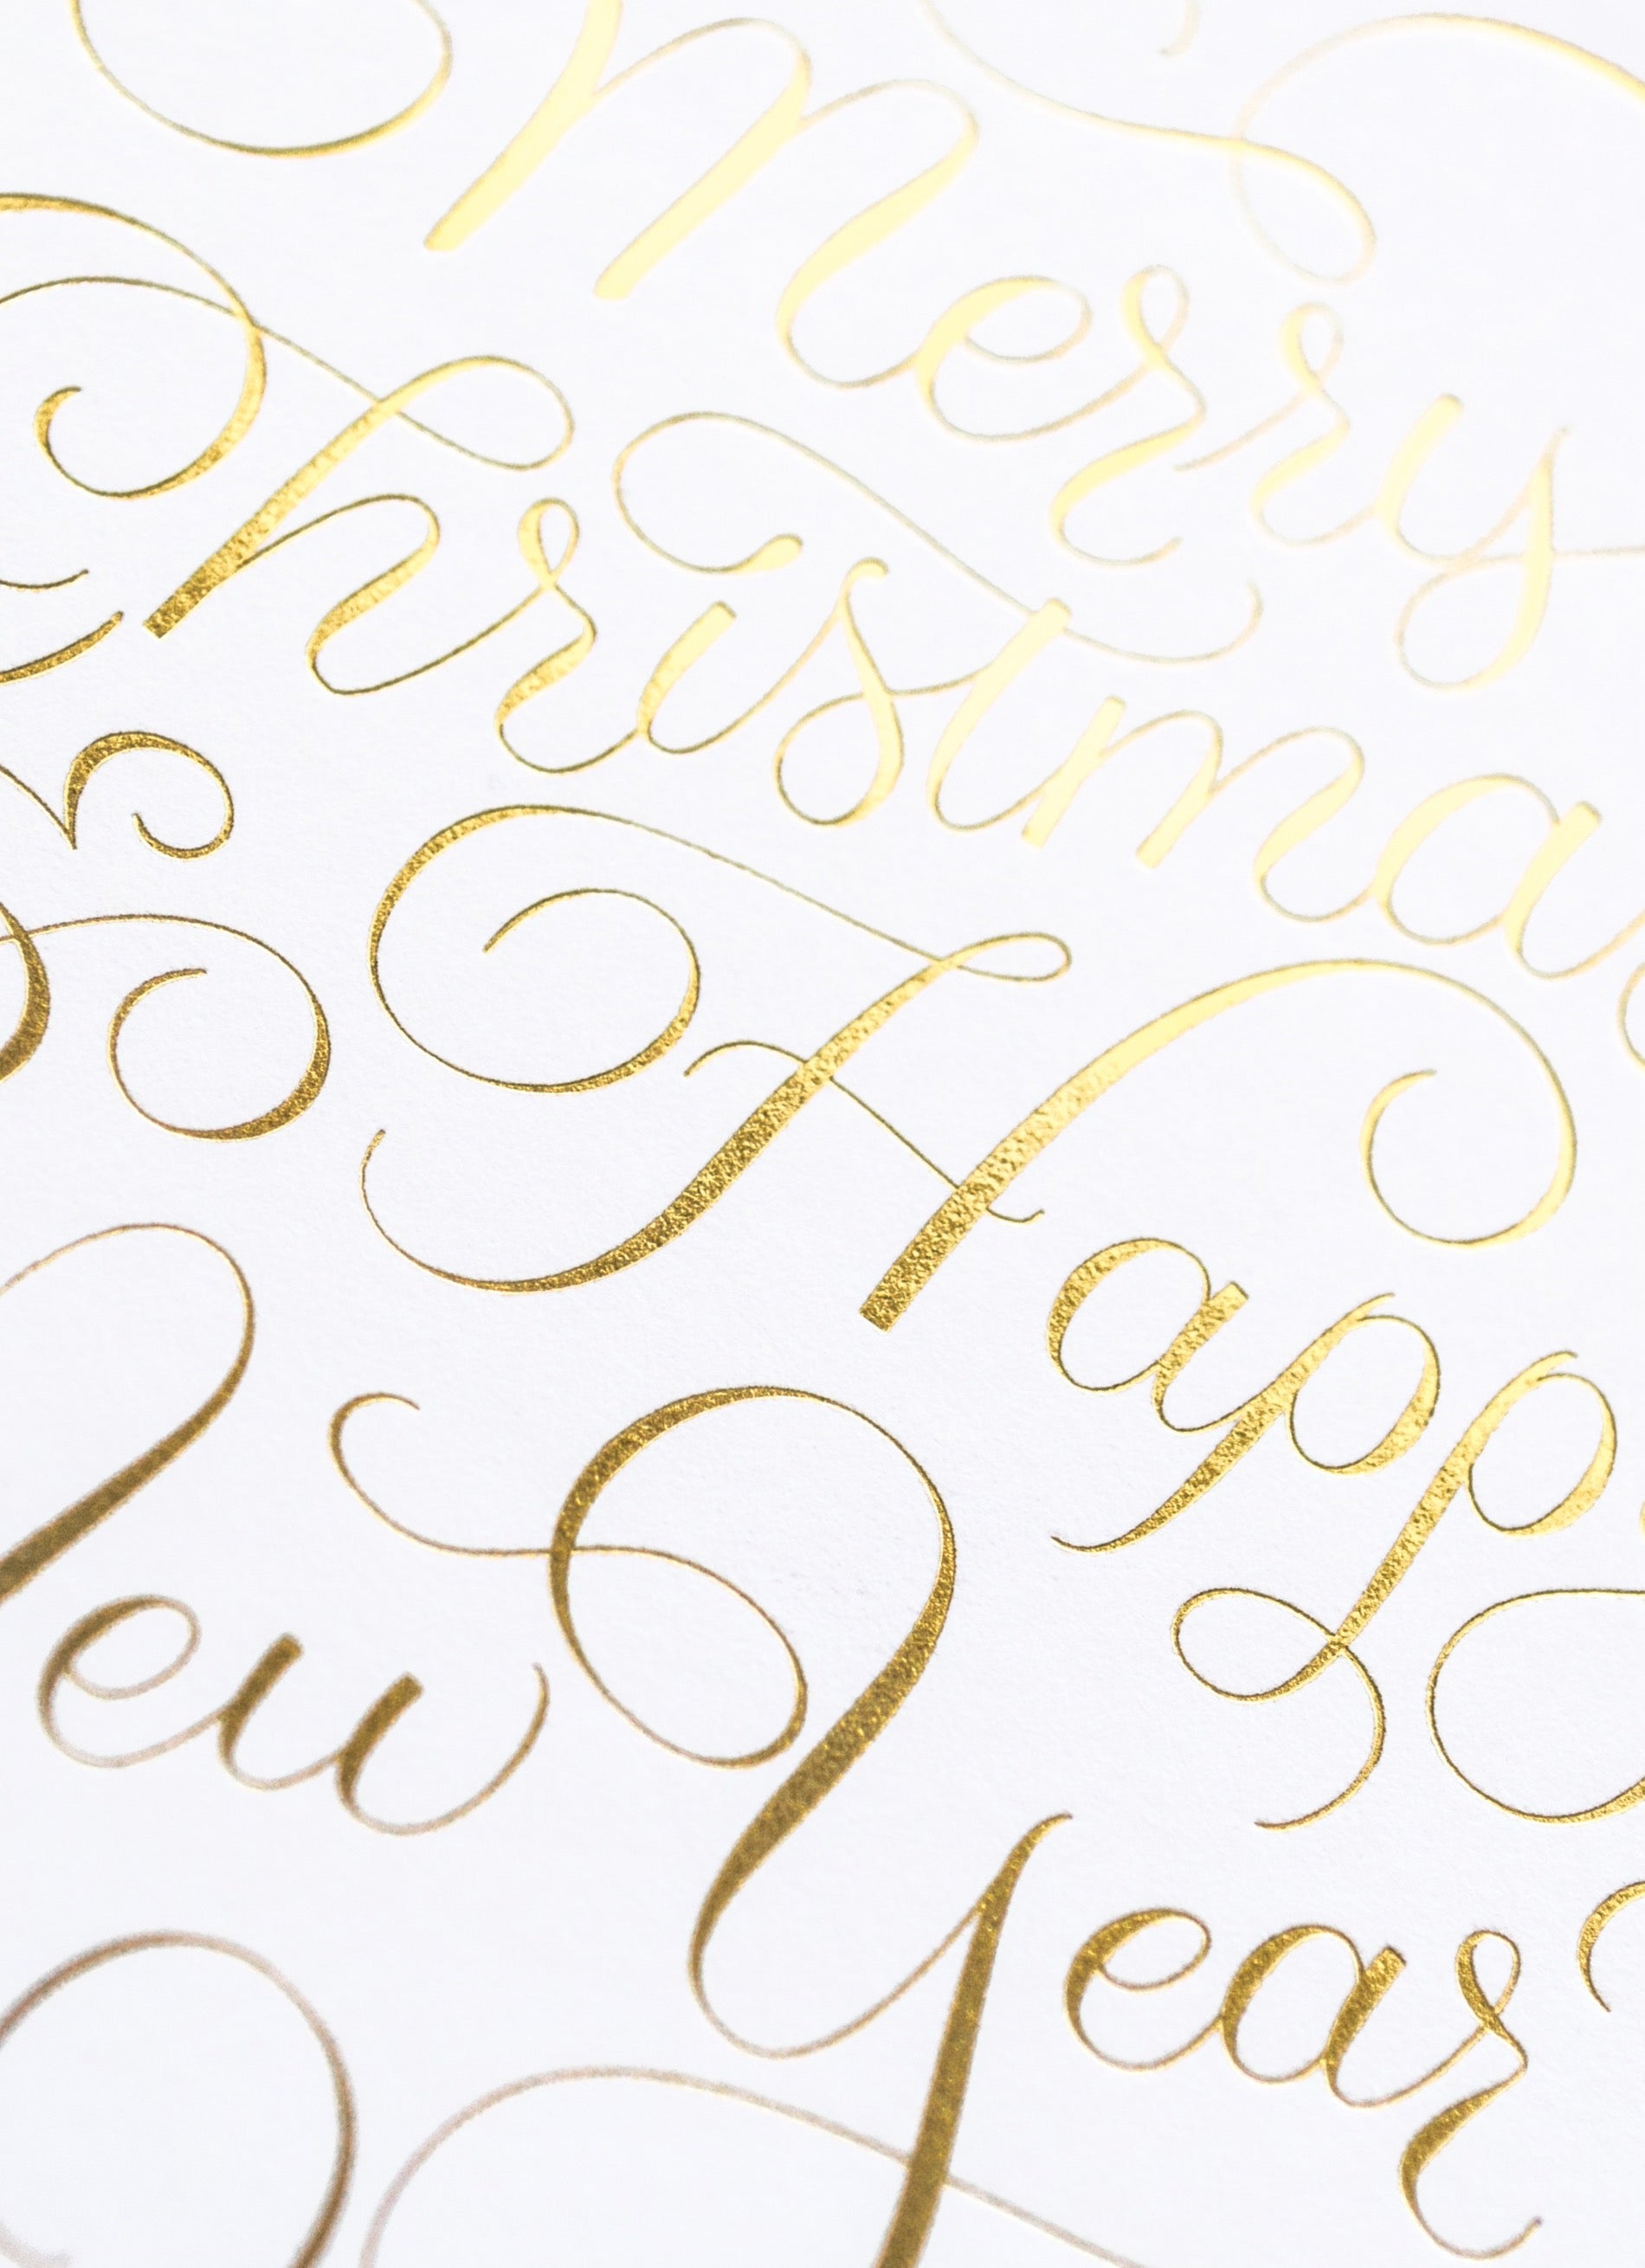 Merry Christmas & Happy New Year Gold Lettered Card